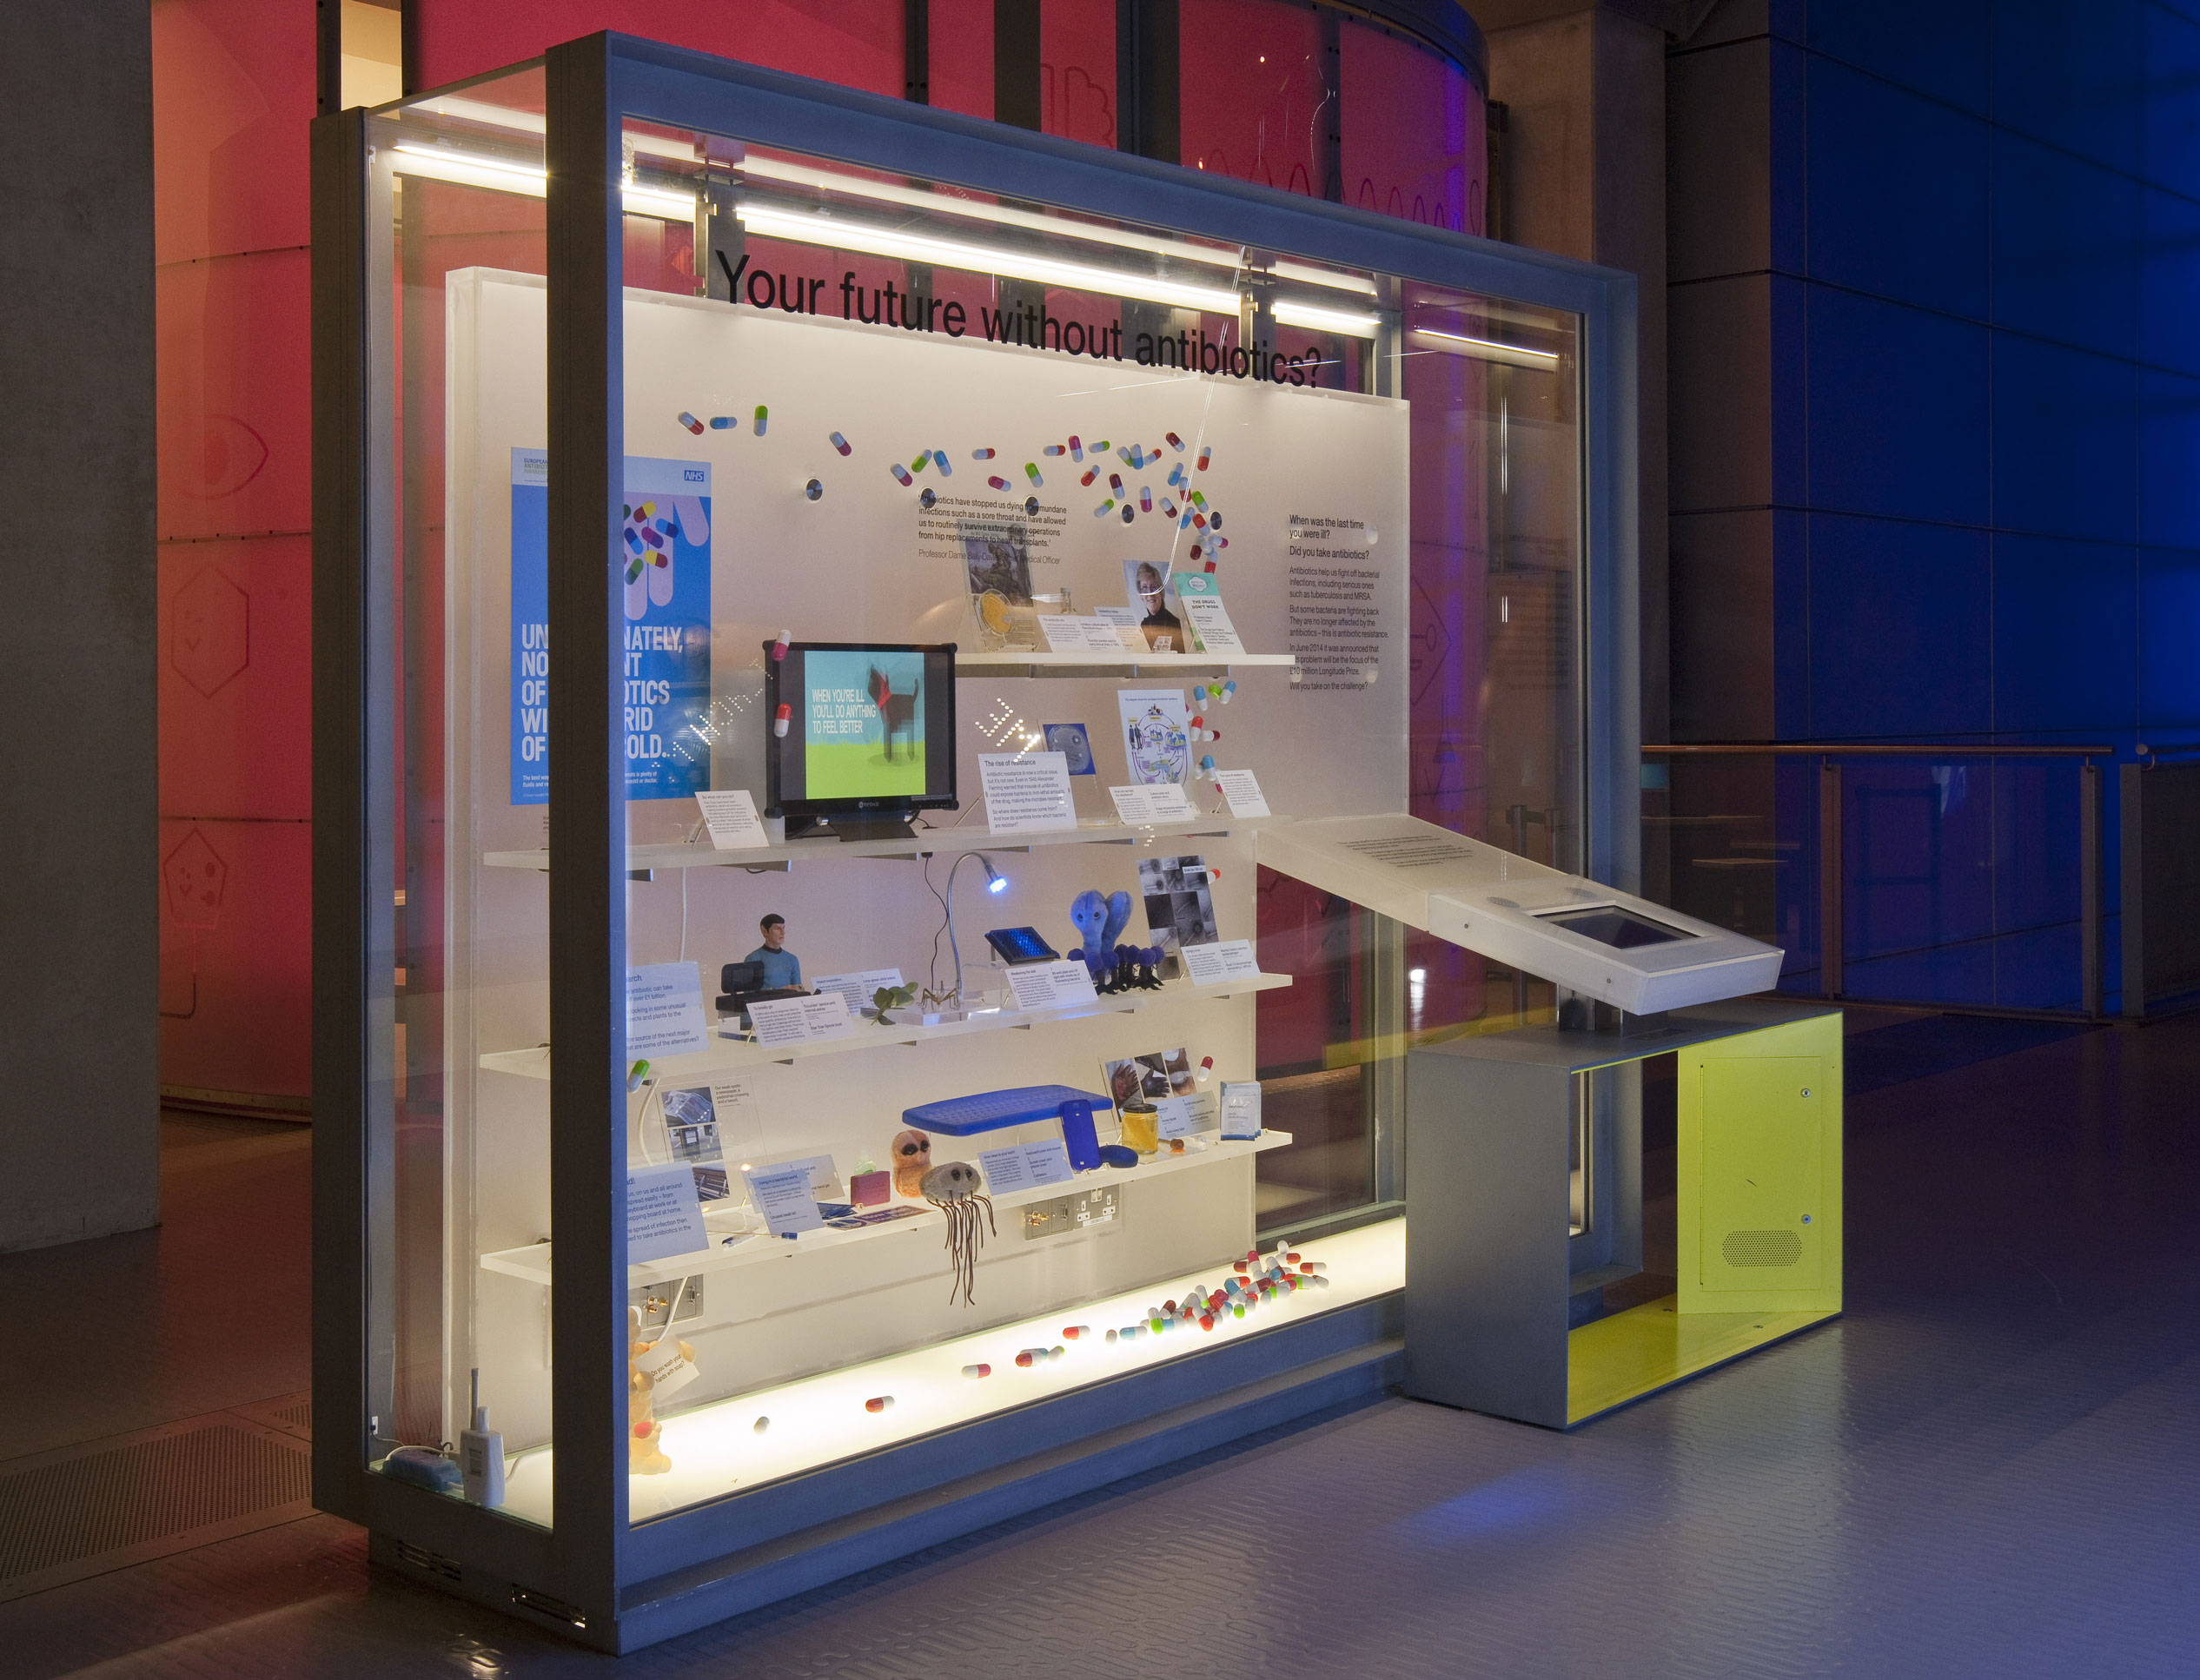 The new antibiotics display in the Museum's Who Am I? gallery. Image credit: Science Museum